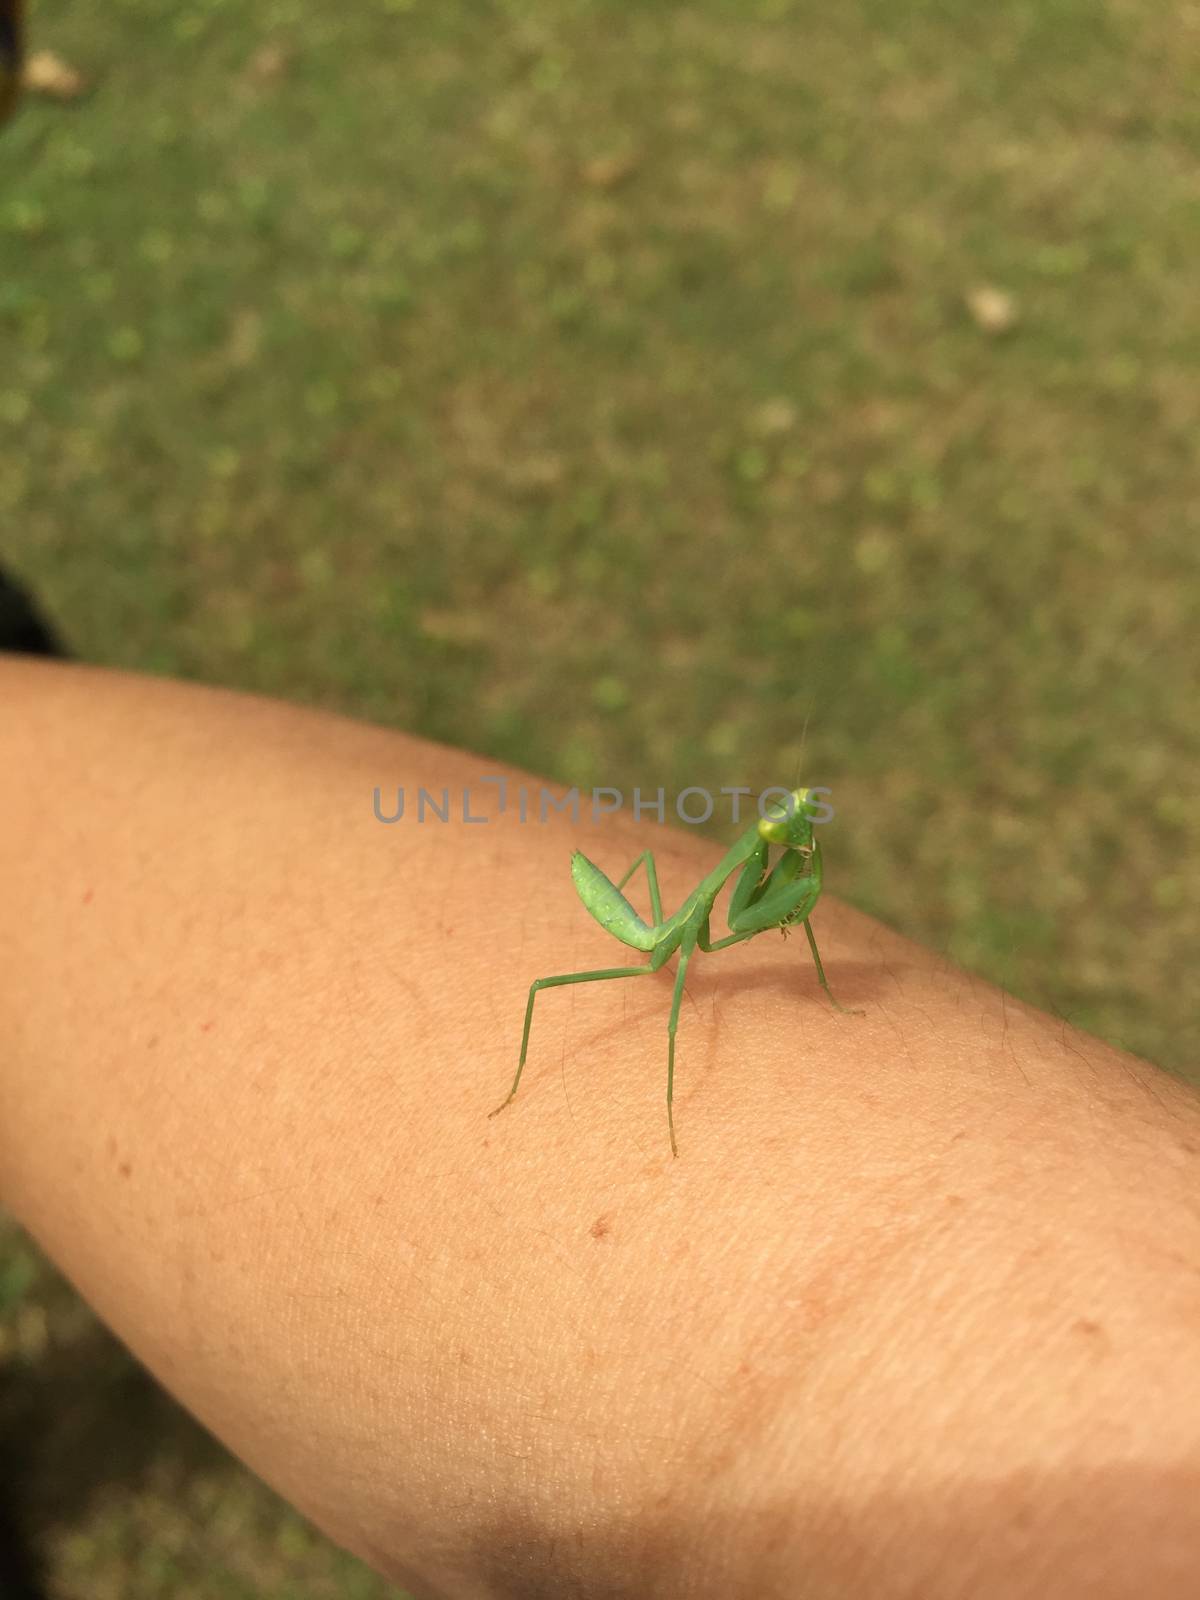 little green mantis on her arm by Hepjam